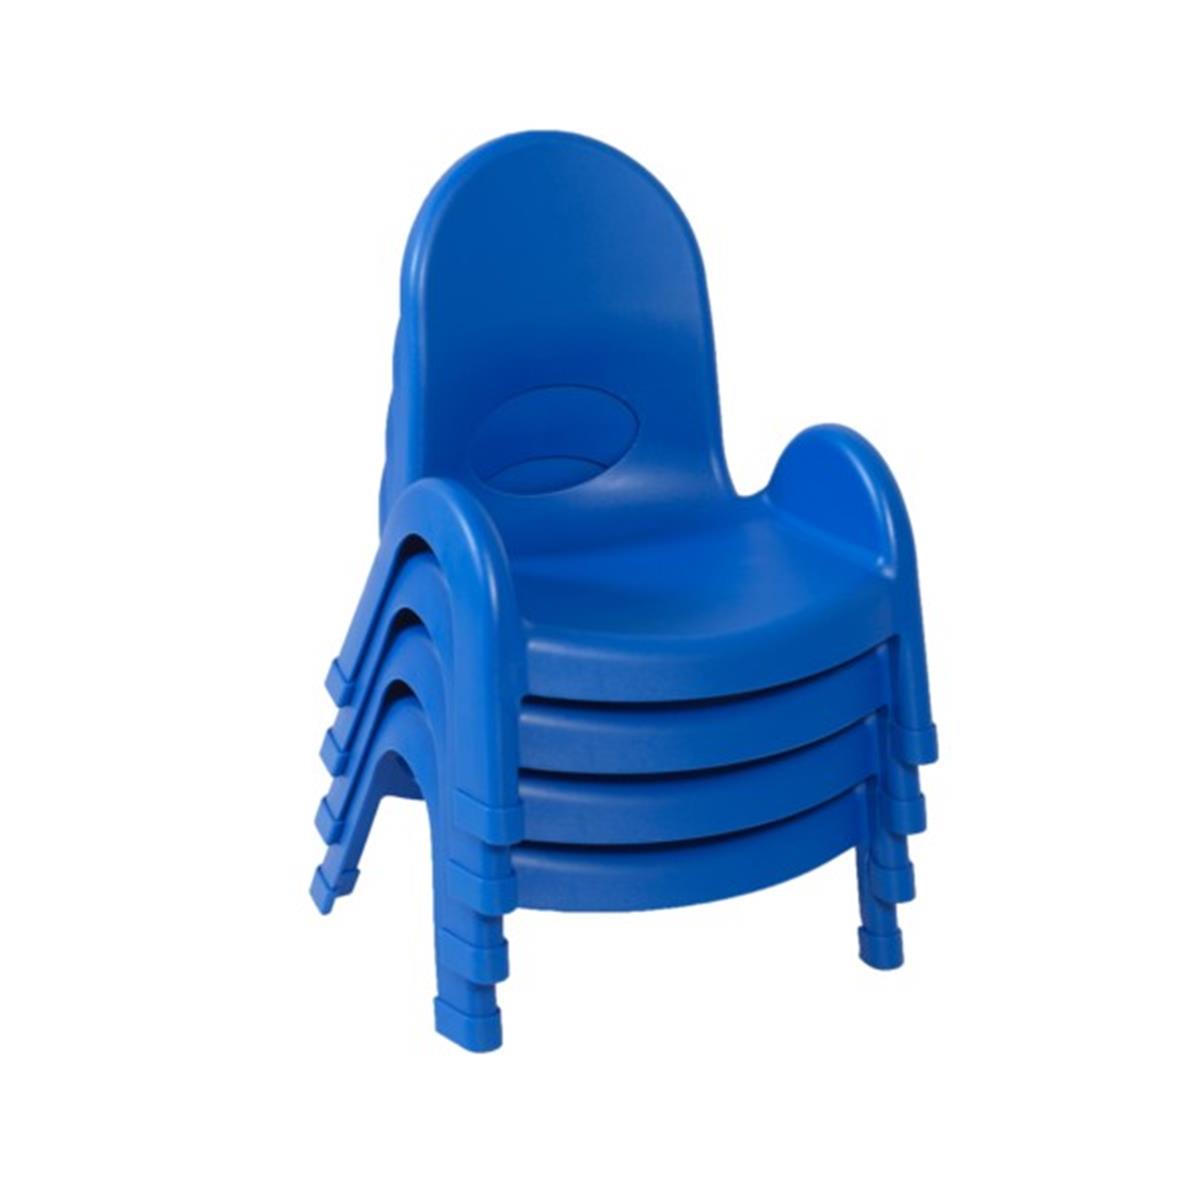 Ab7705pb4 5 In. Value Stack Child Chair, Royal Blue - Pack Of 4